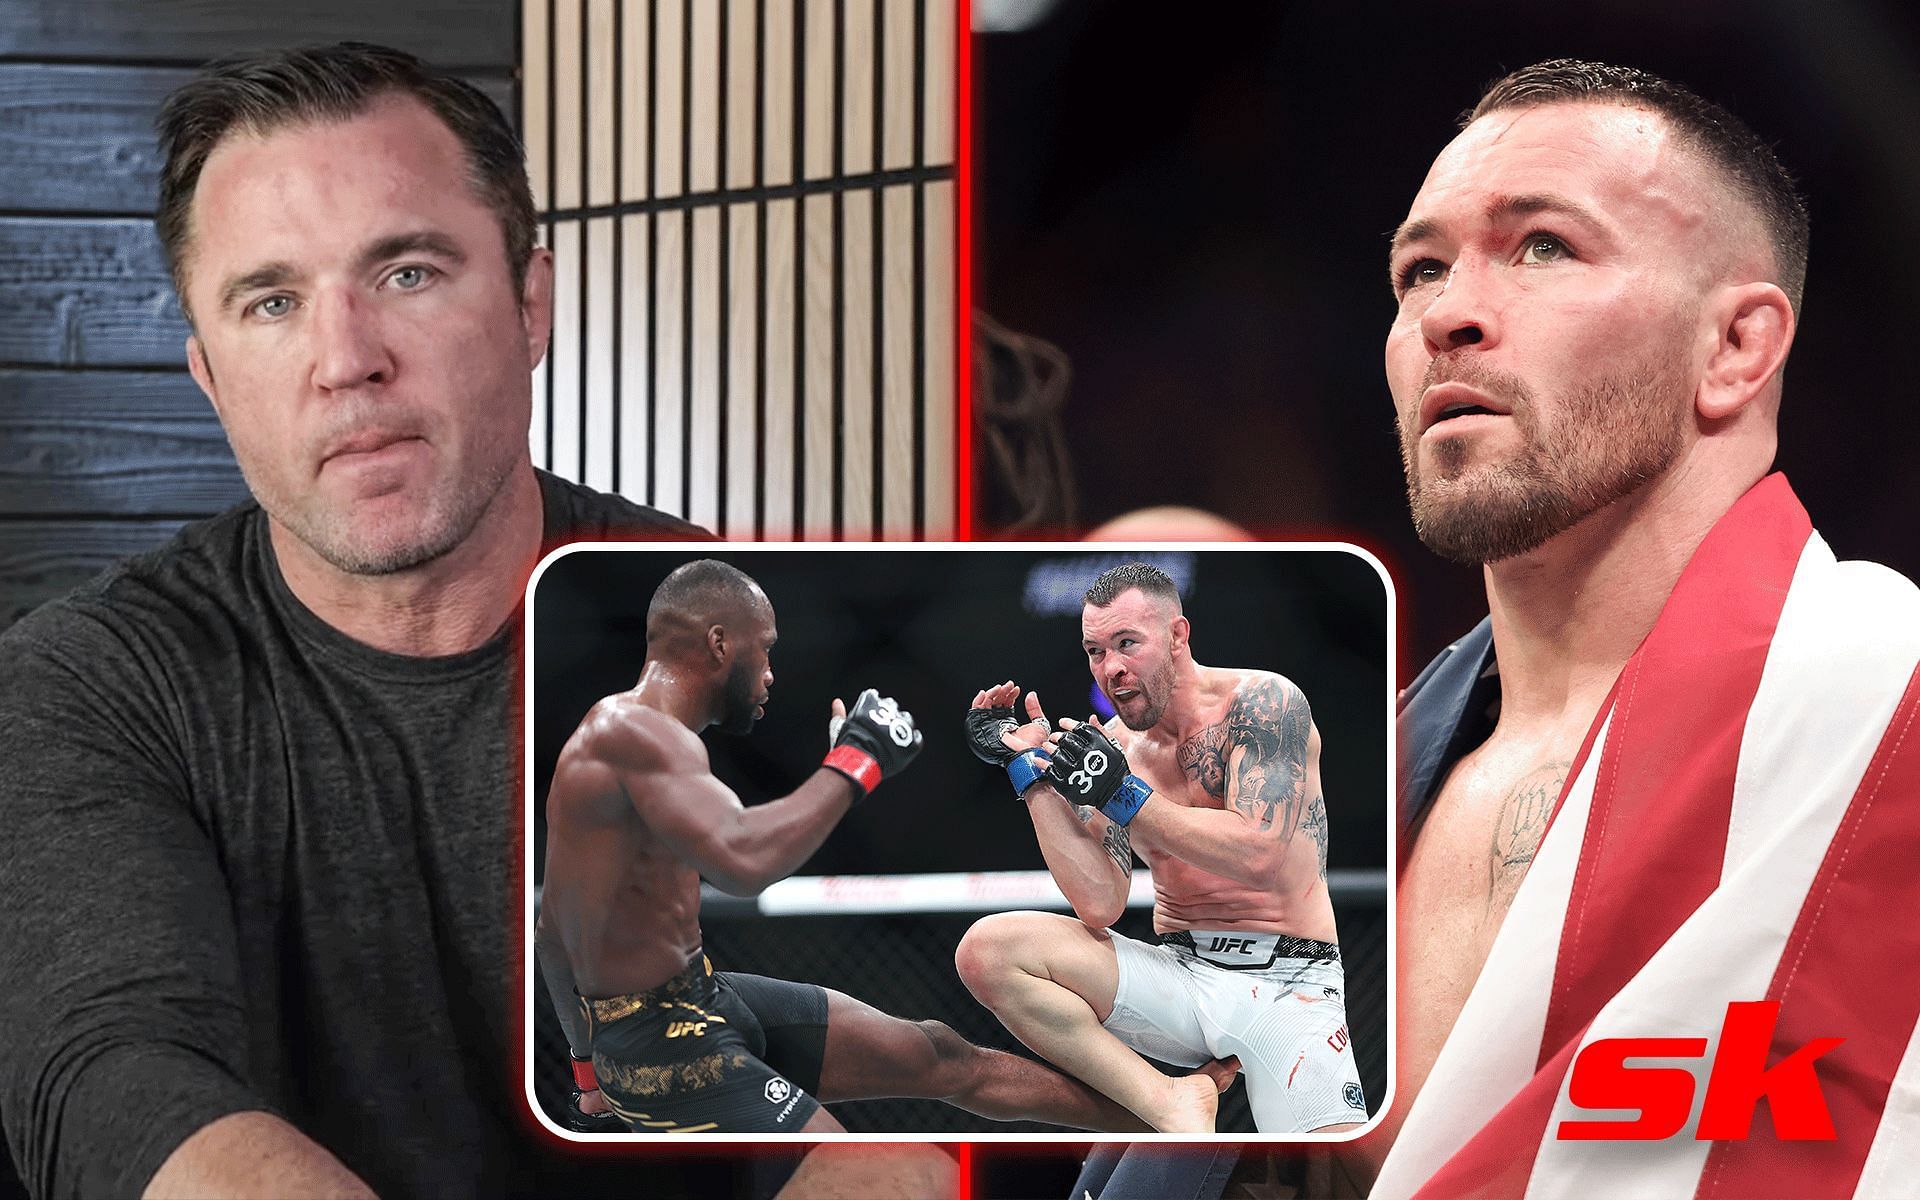 Chael Sonnen [left] on Colby Covington [right] vs. Leon Edwards [inset] [Image via Getty Images and @ChaelSonnen on YT]